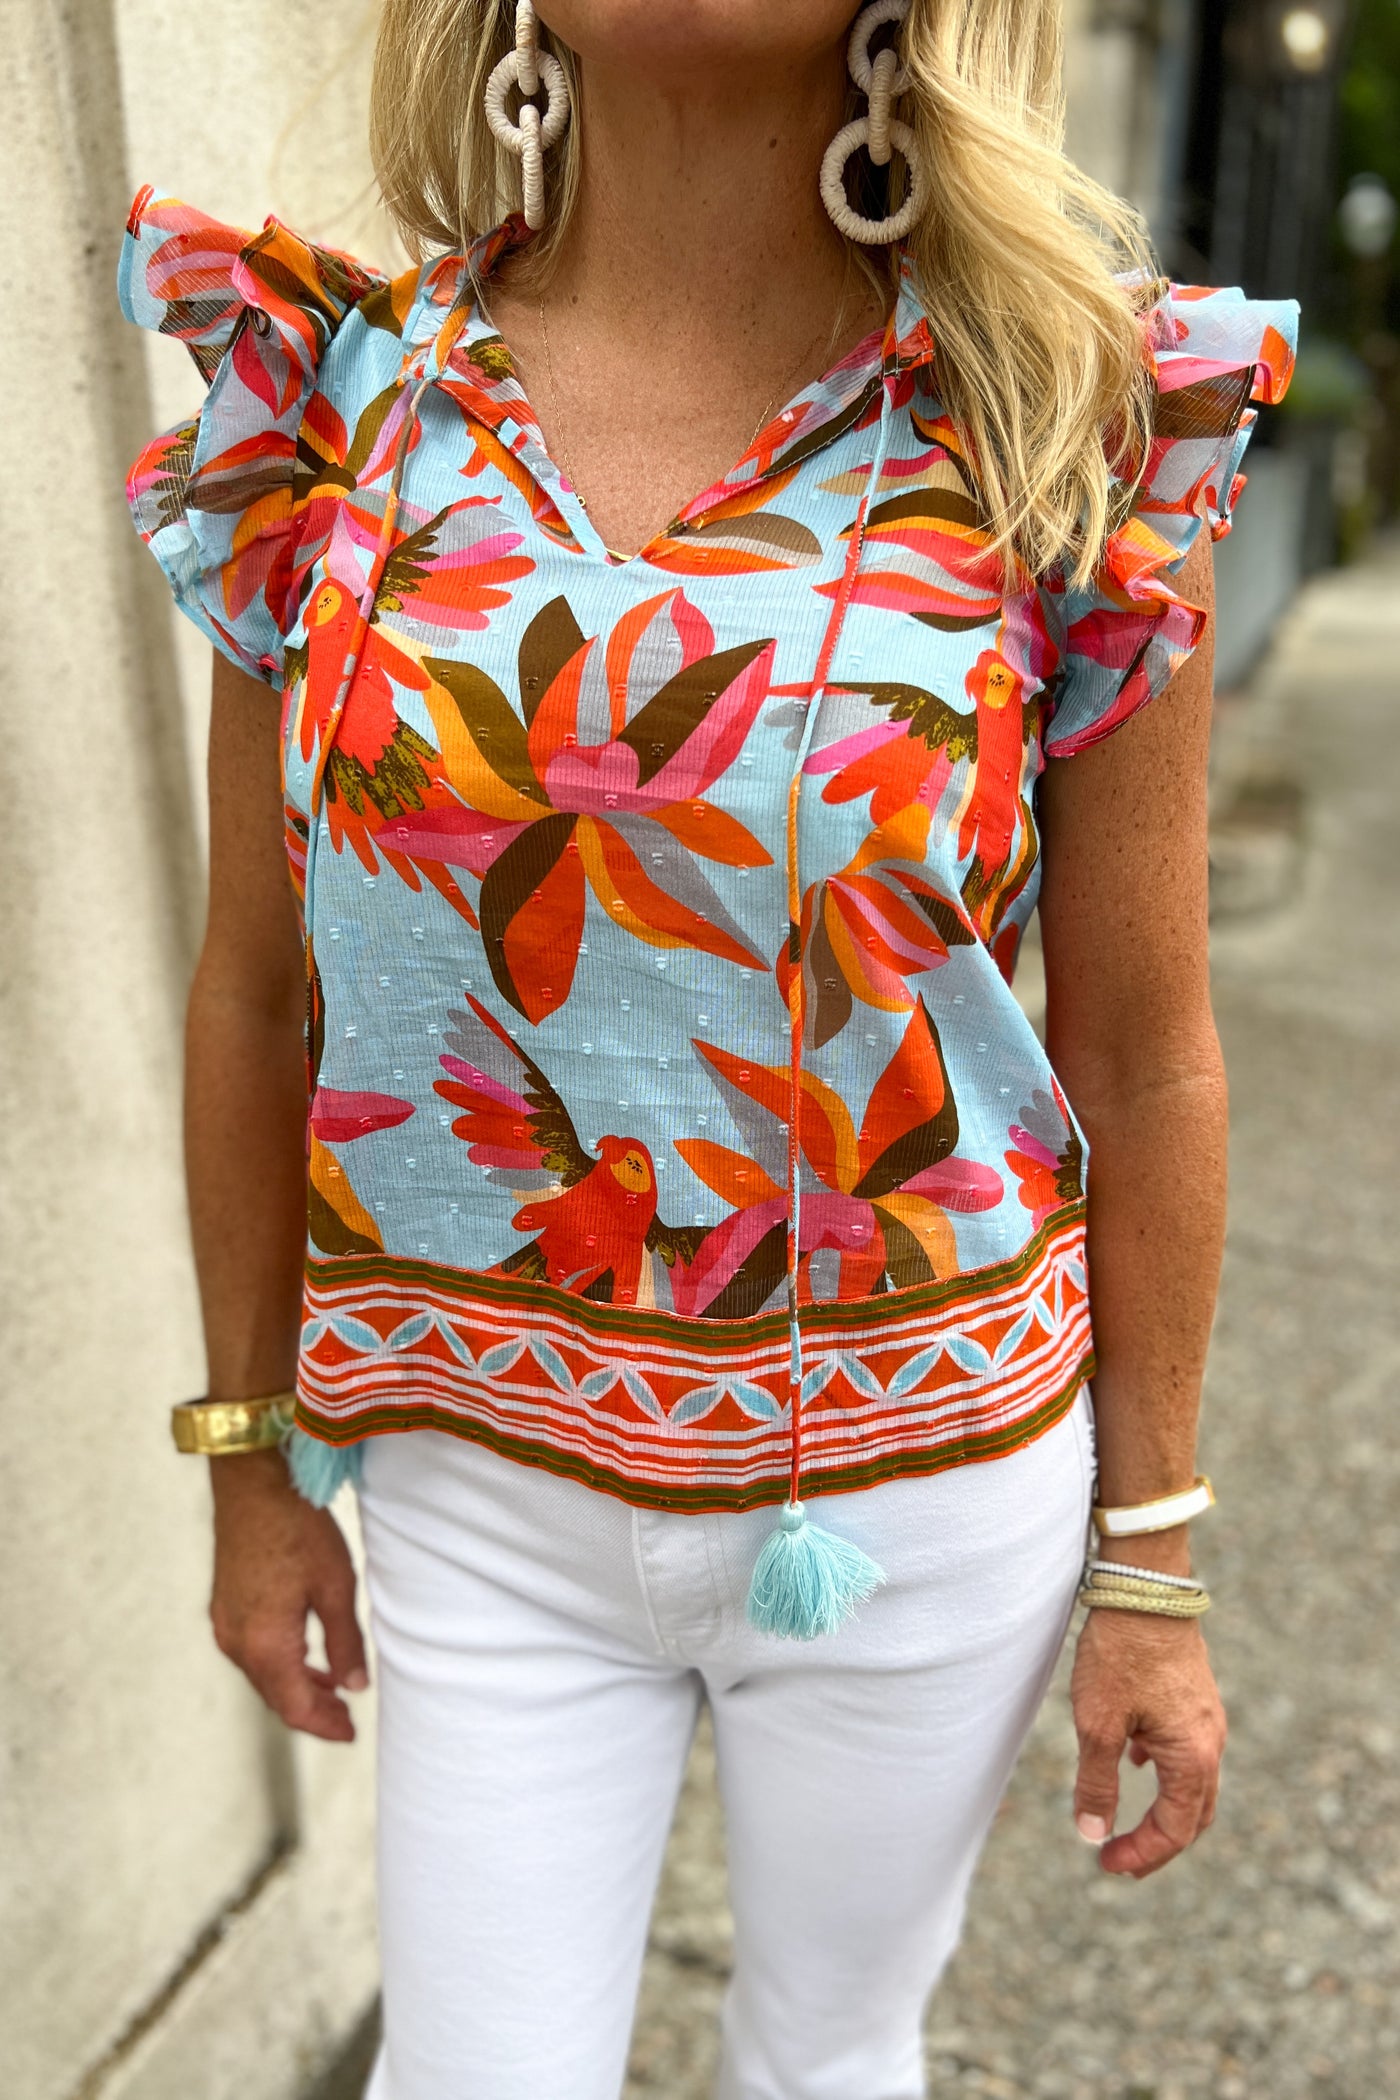 Watercolor top, orange blossom by King + Pitt